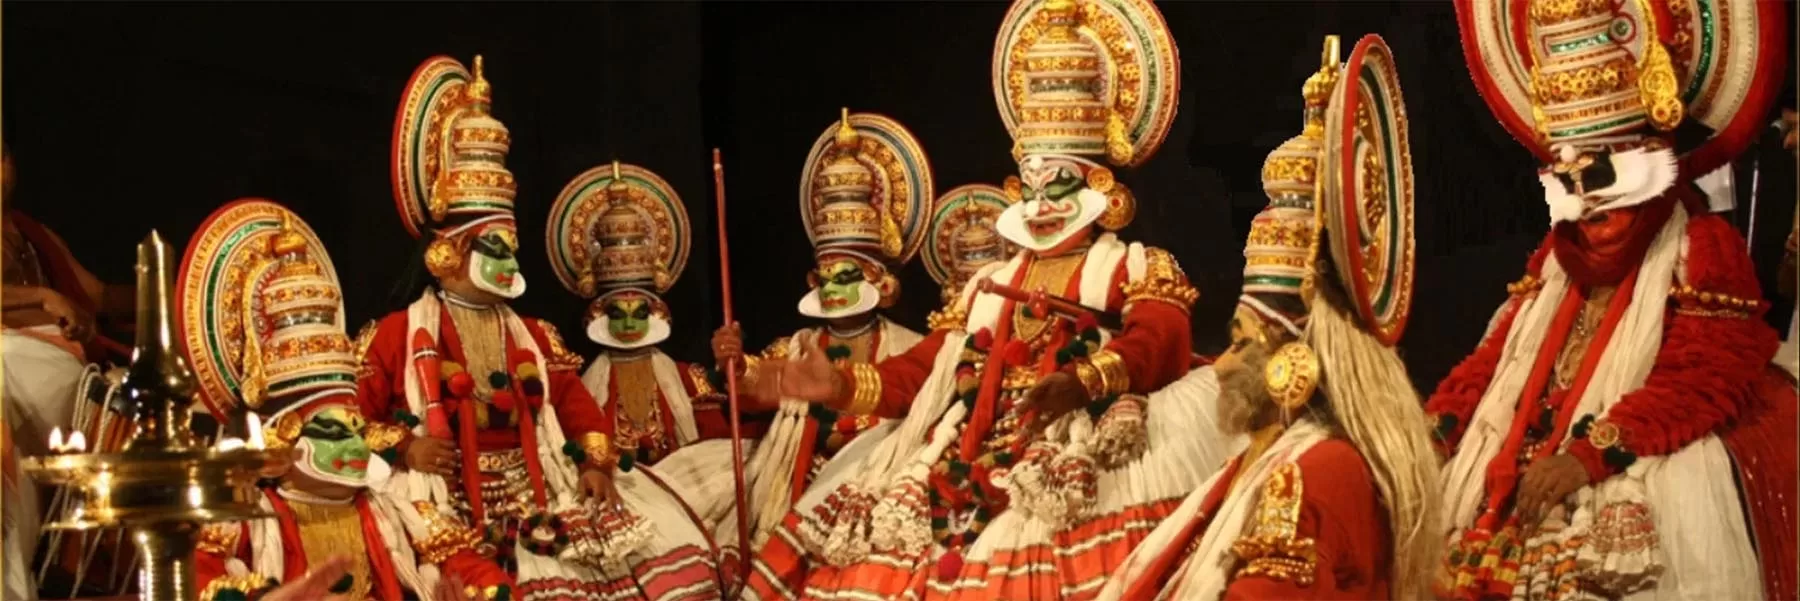 10 Dance Forms of India